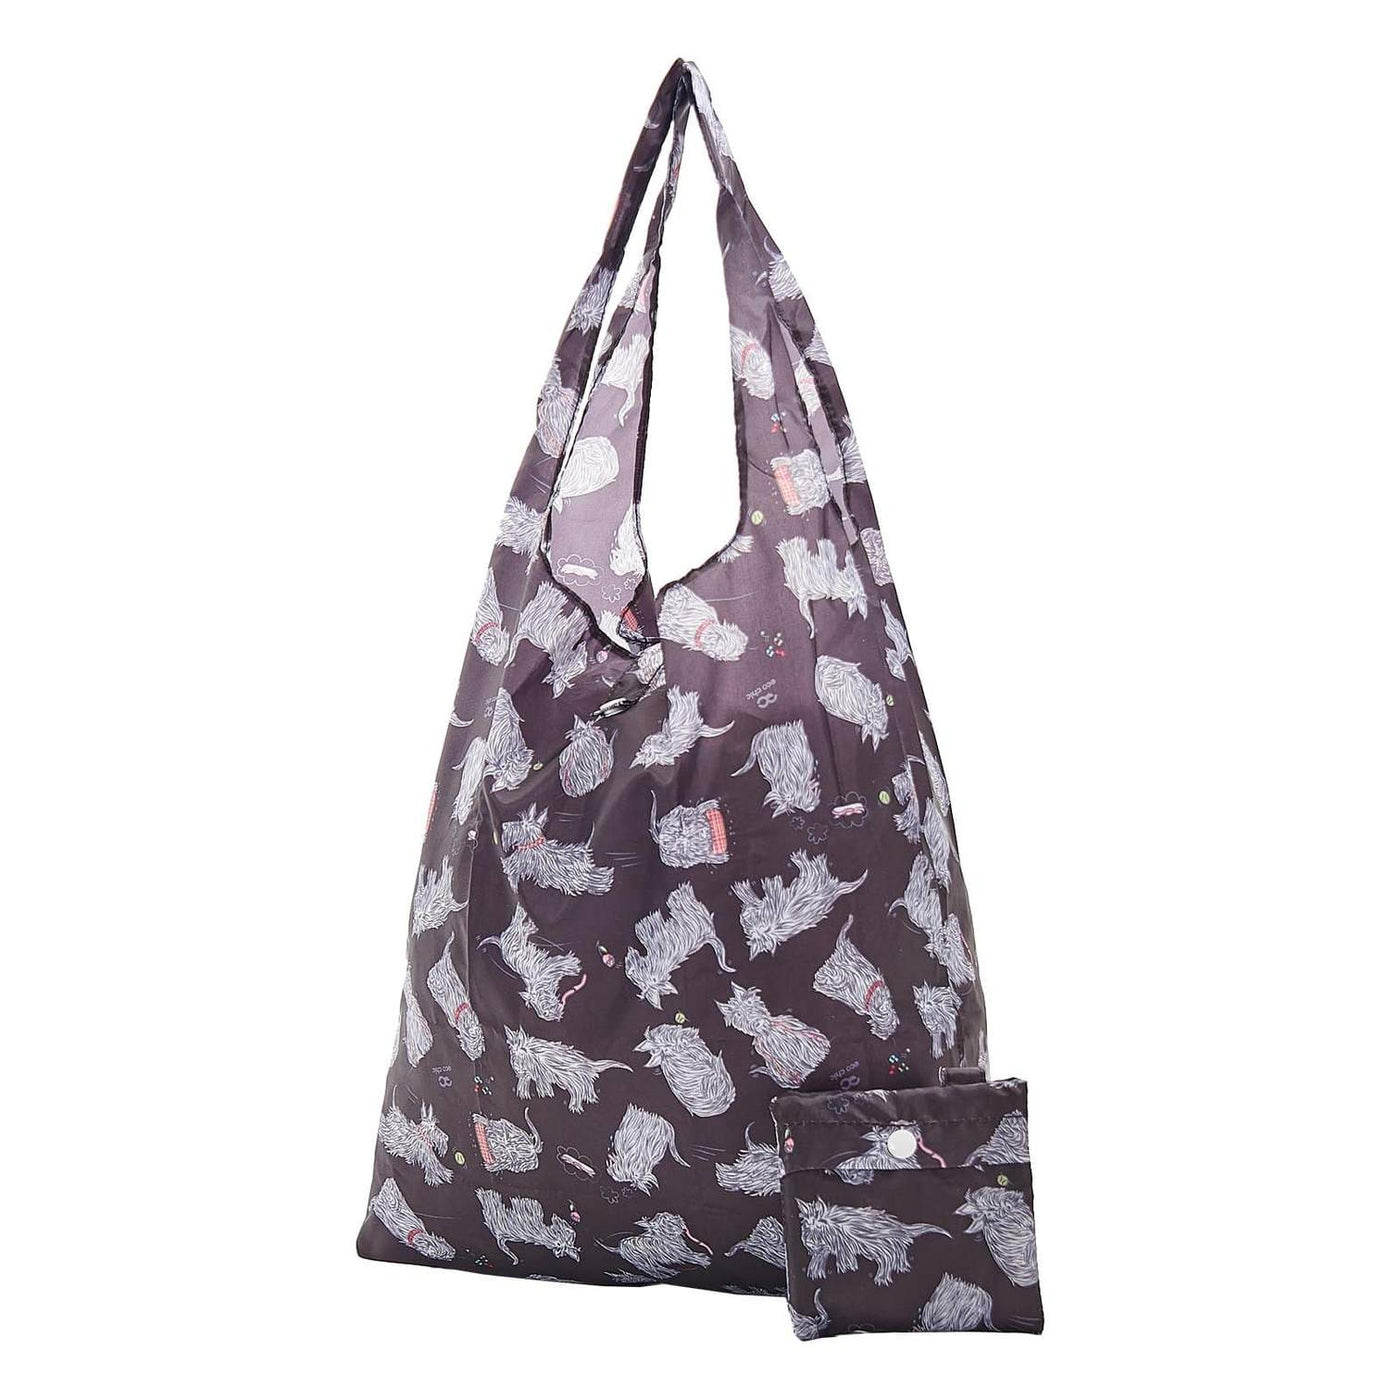 Eco Chic Foldable Recycled Shopping Bag -Scatty Dog -Black